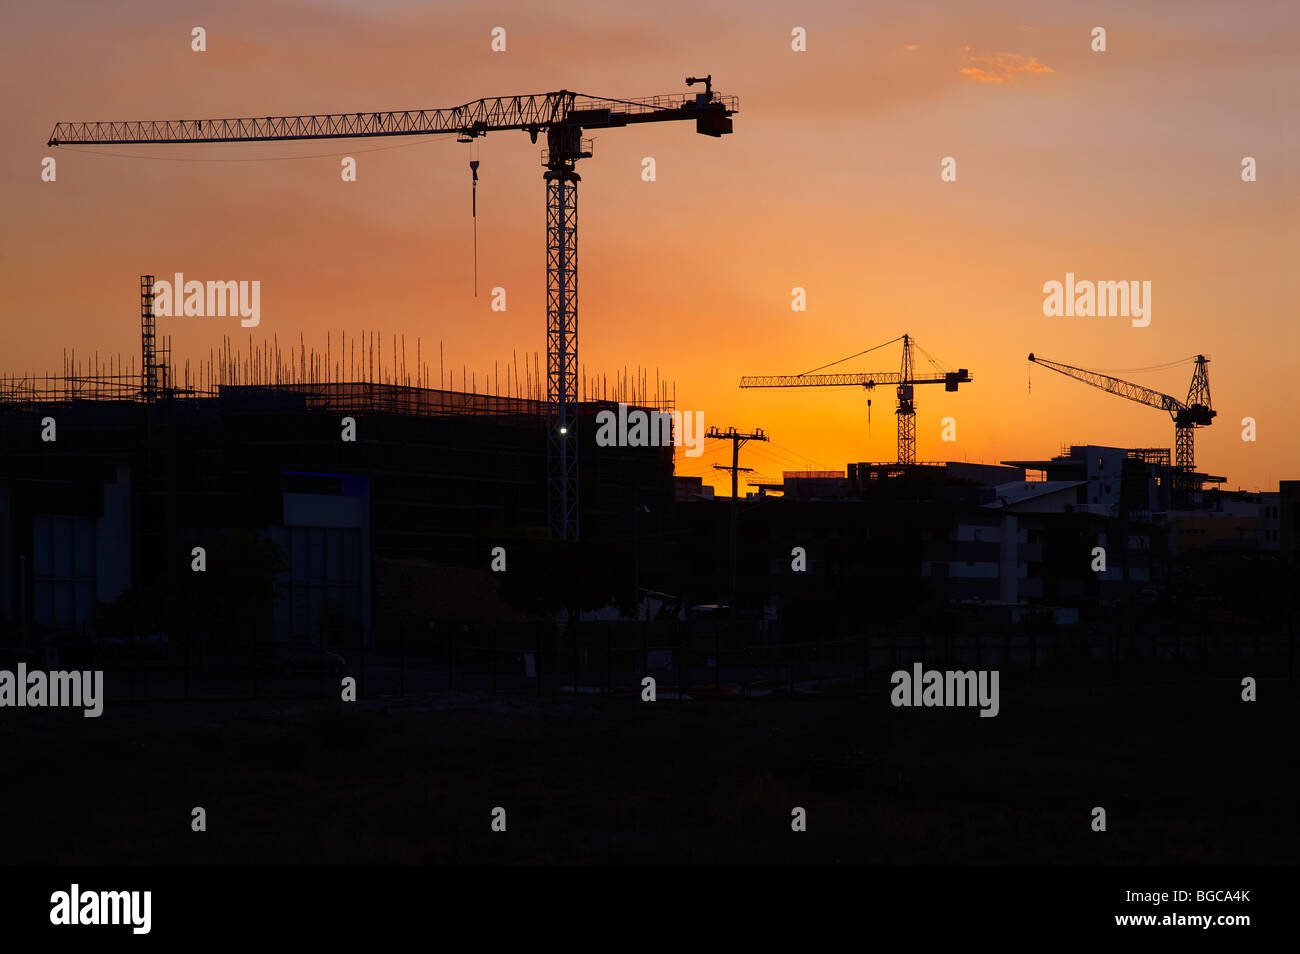 Tower cranes silhouetted on a construction site Stock Photo